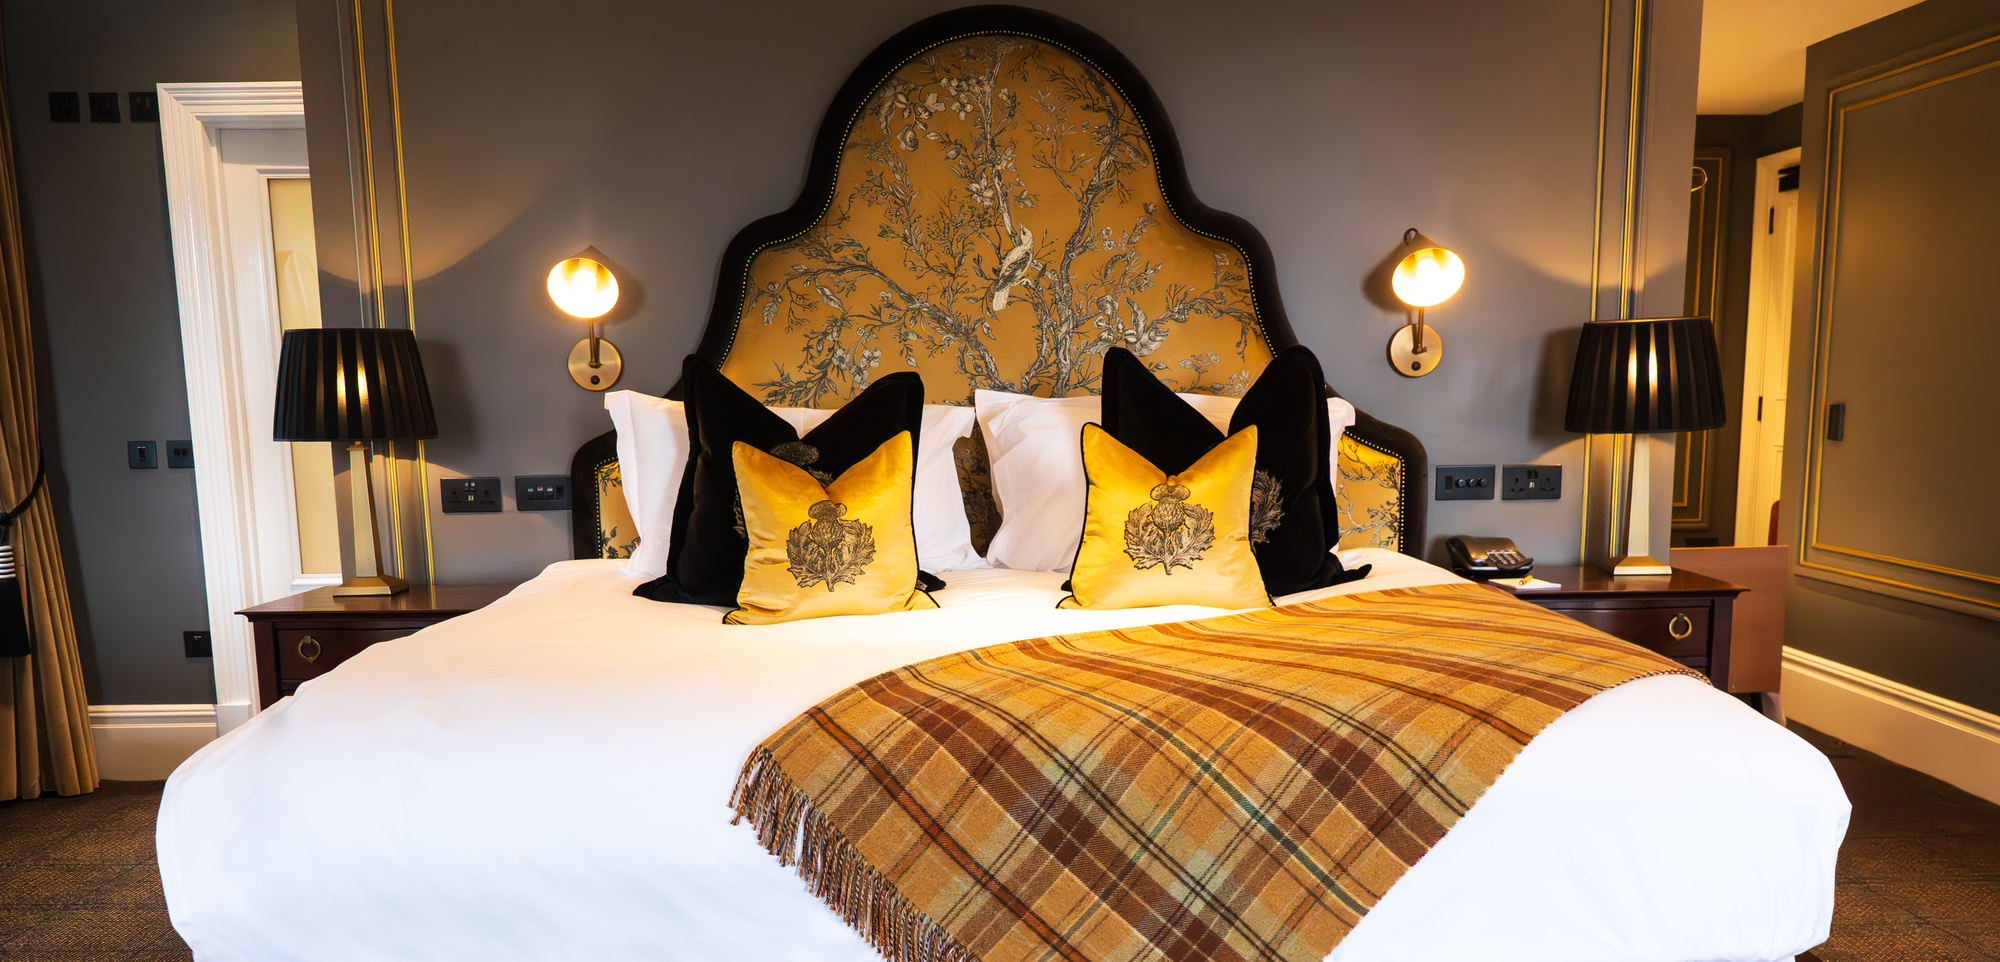 a luxurious bed with a large headboard and tartan blanket